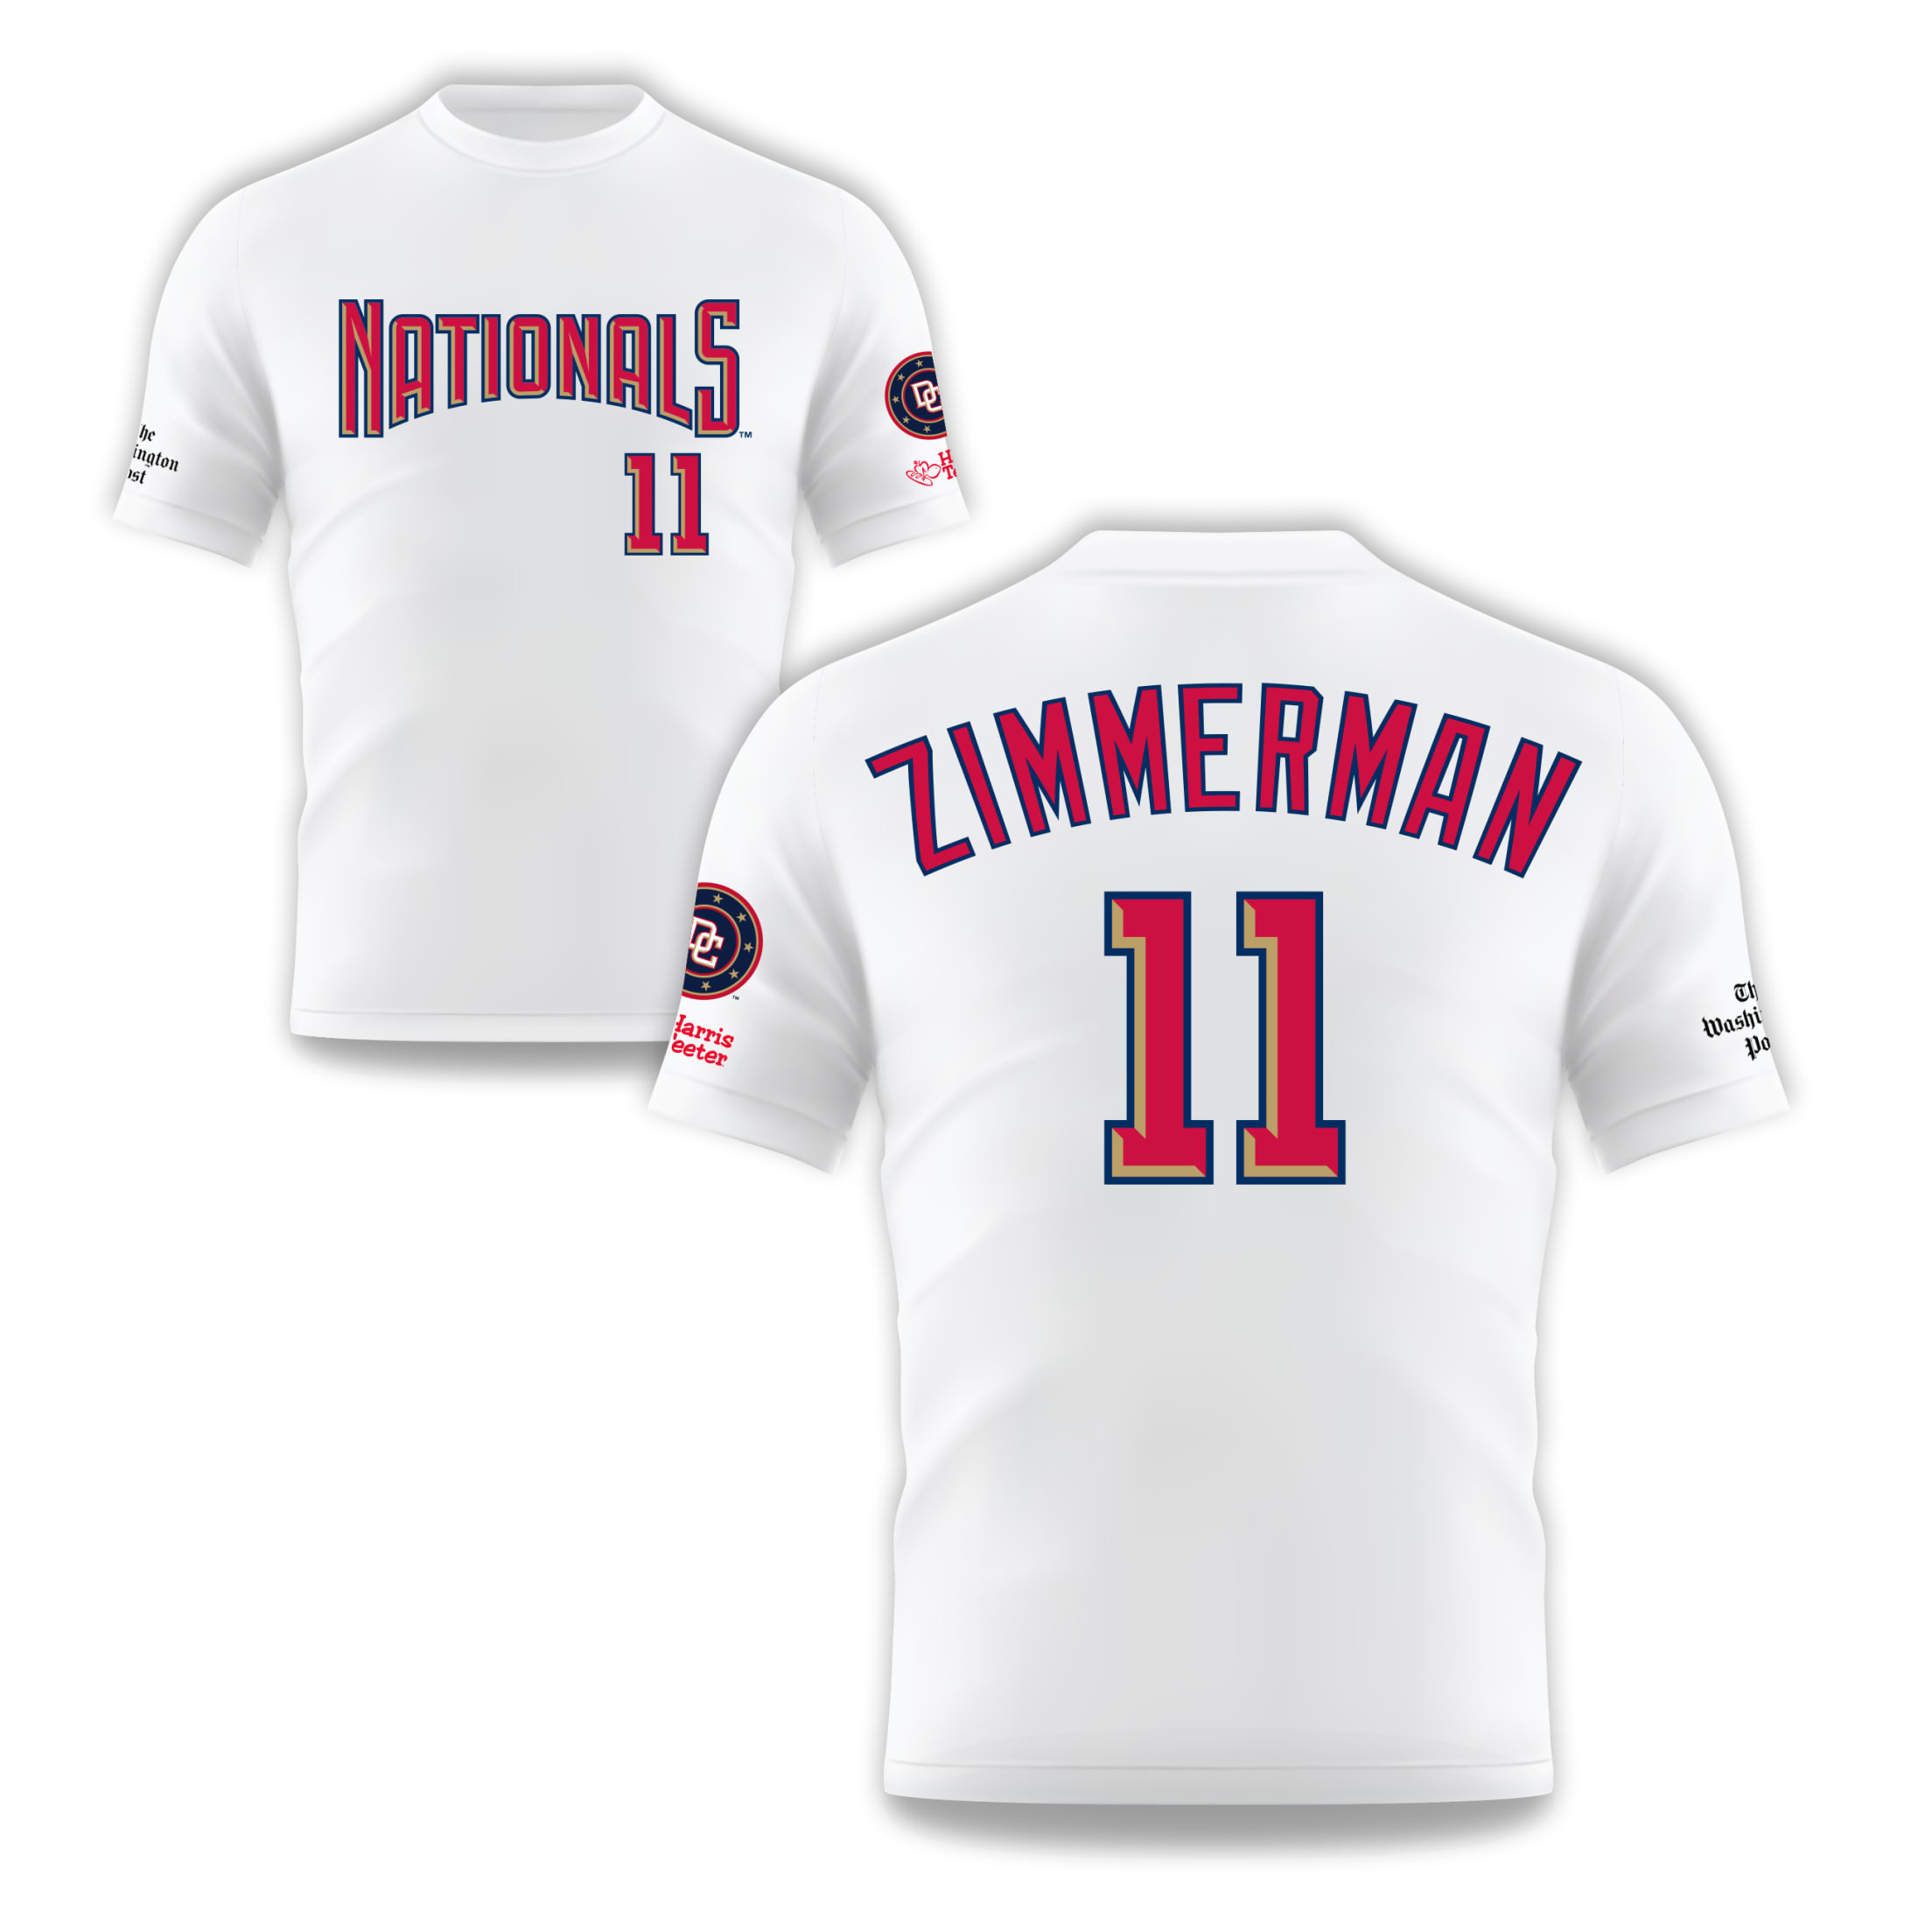 Washington Nationals fans may want to show their appreciation for Ryan  Zimmerman this weekend, just in case - Federal Baseball